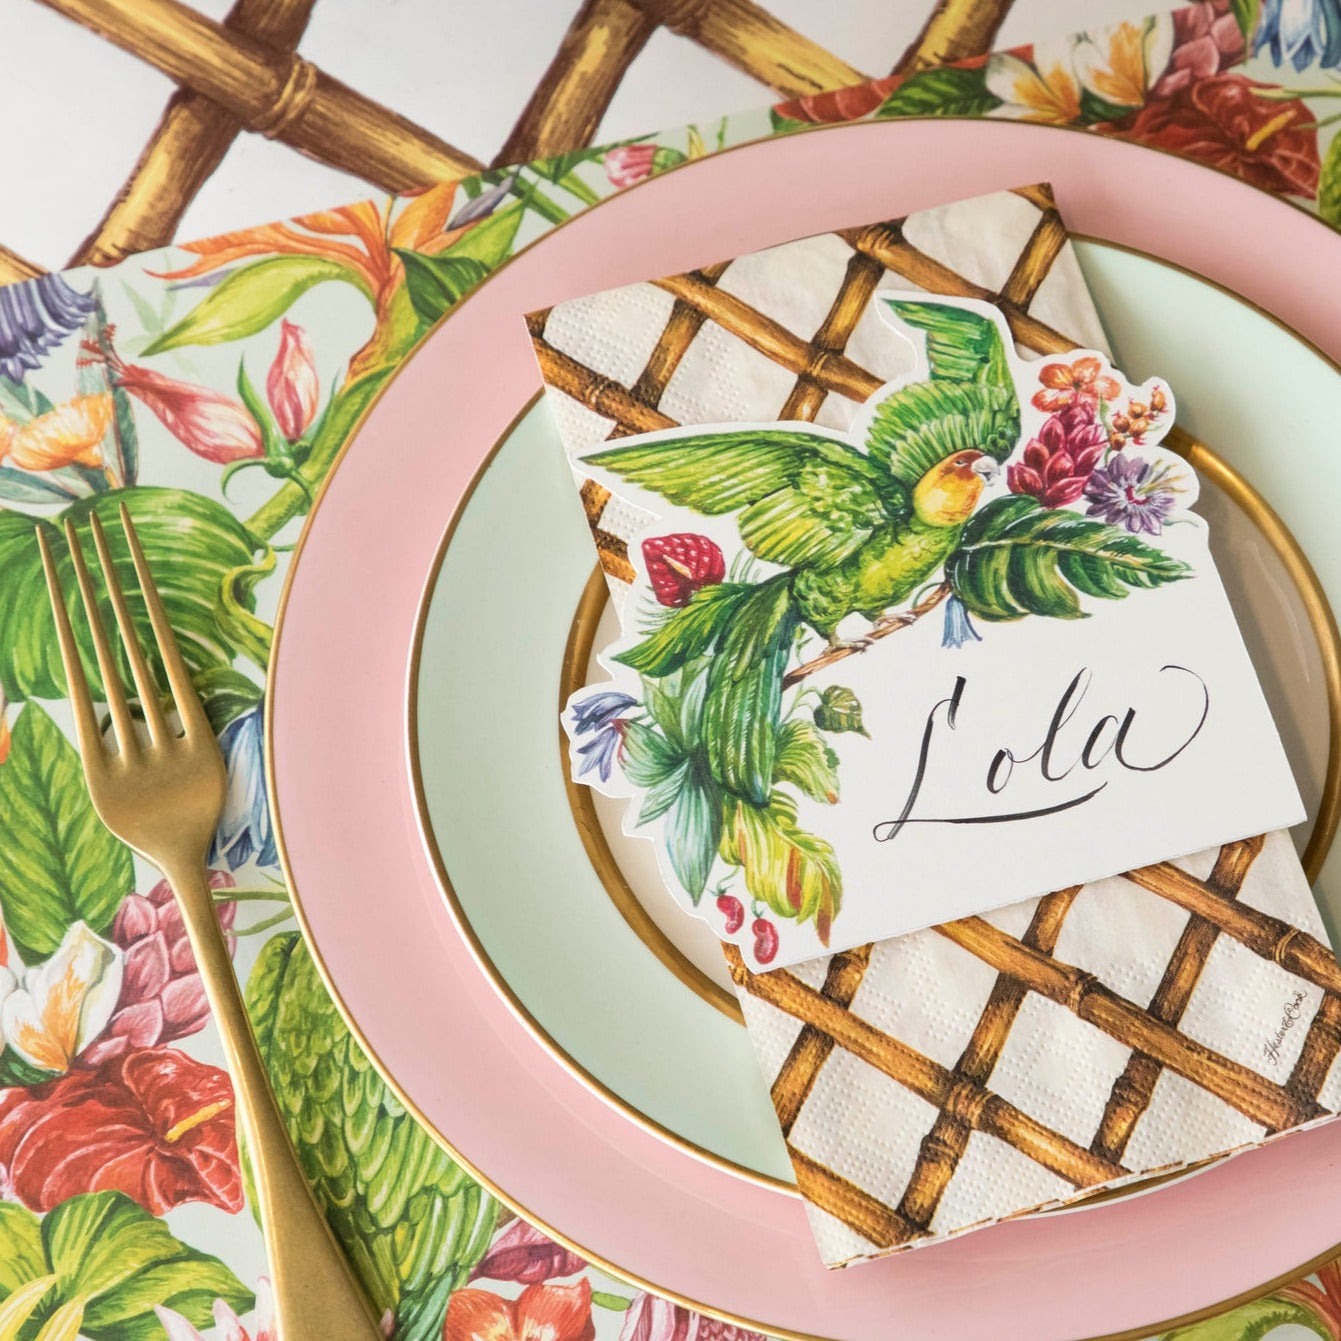 A vibrant tropical-themed place setting featuring a Parrot Place Card labeled &quot;Lola&quot; laying flat on the plate.